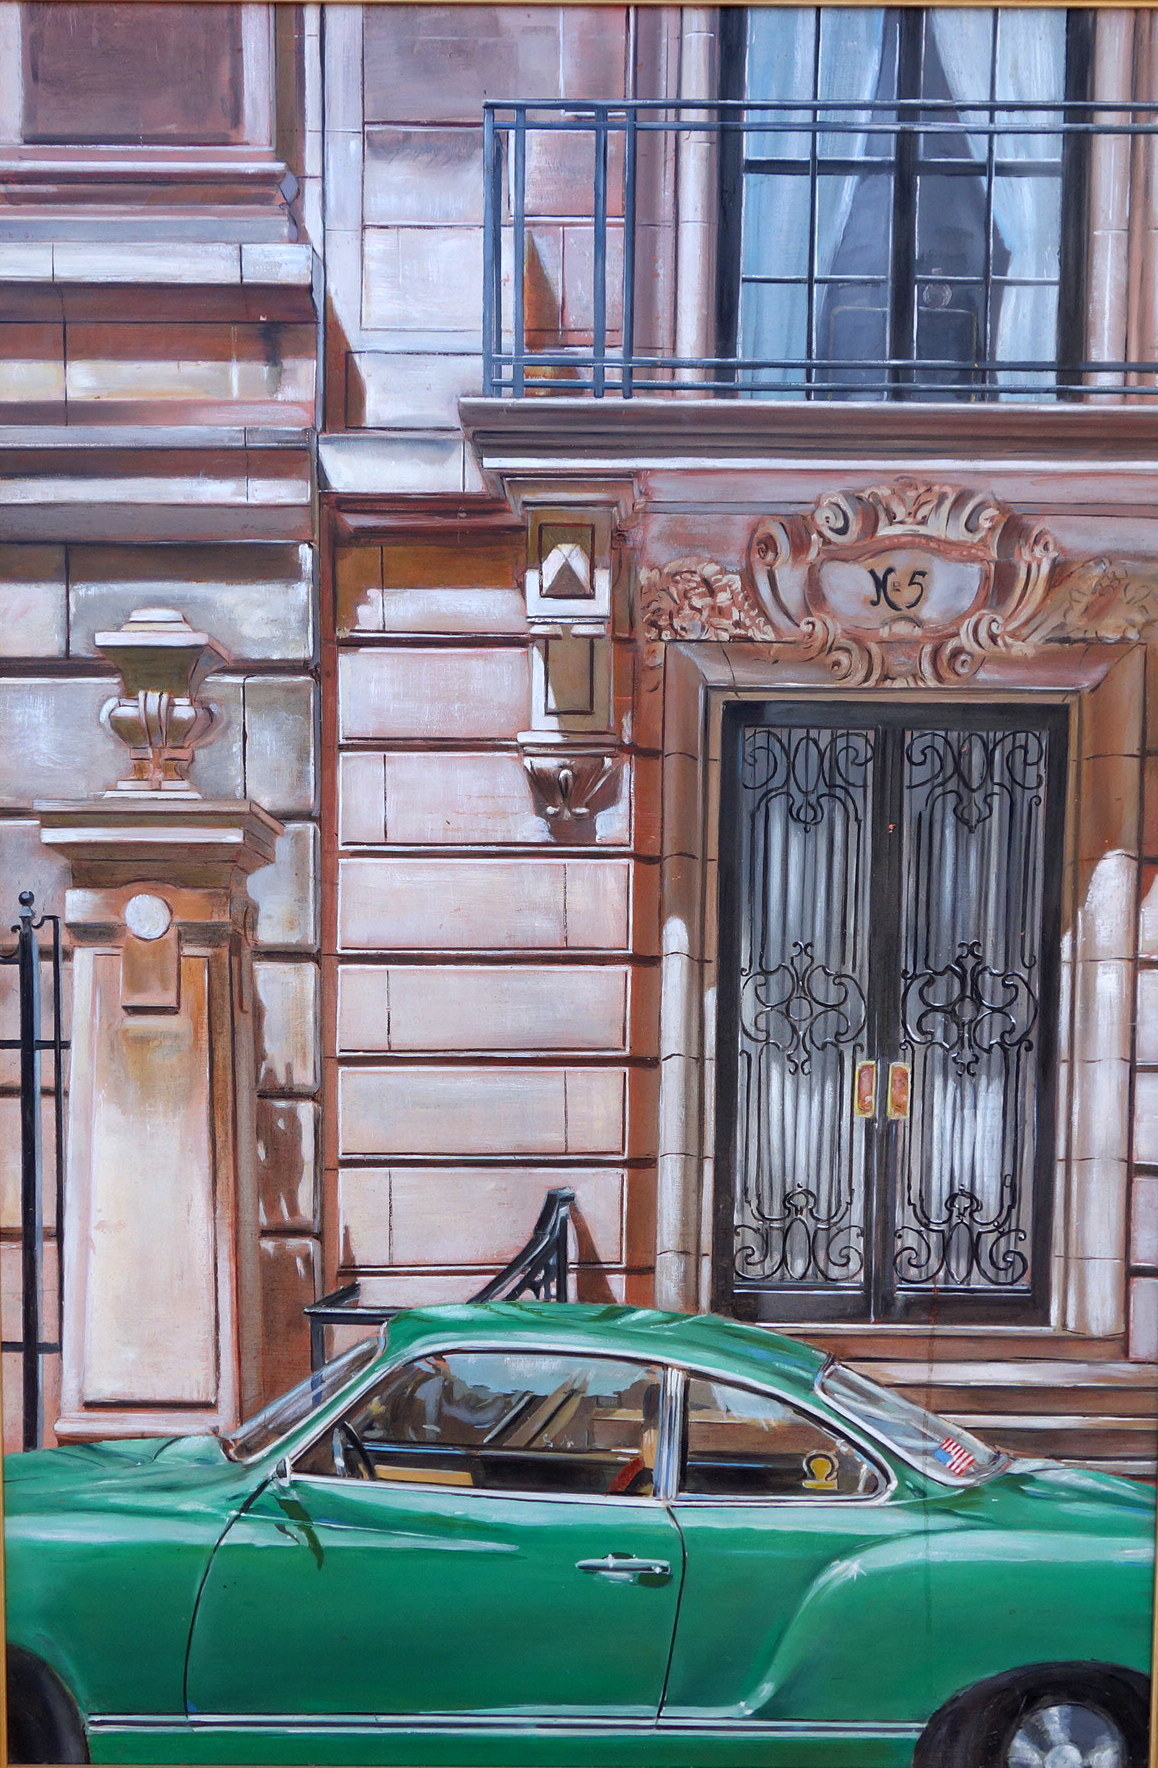    Green VW in front of Building, around 70th and 5th.      1982      Oils on Masonite, 26” x 36”   